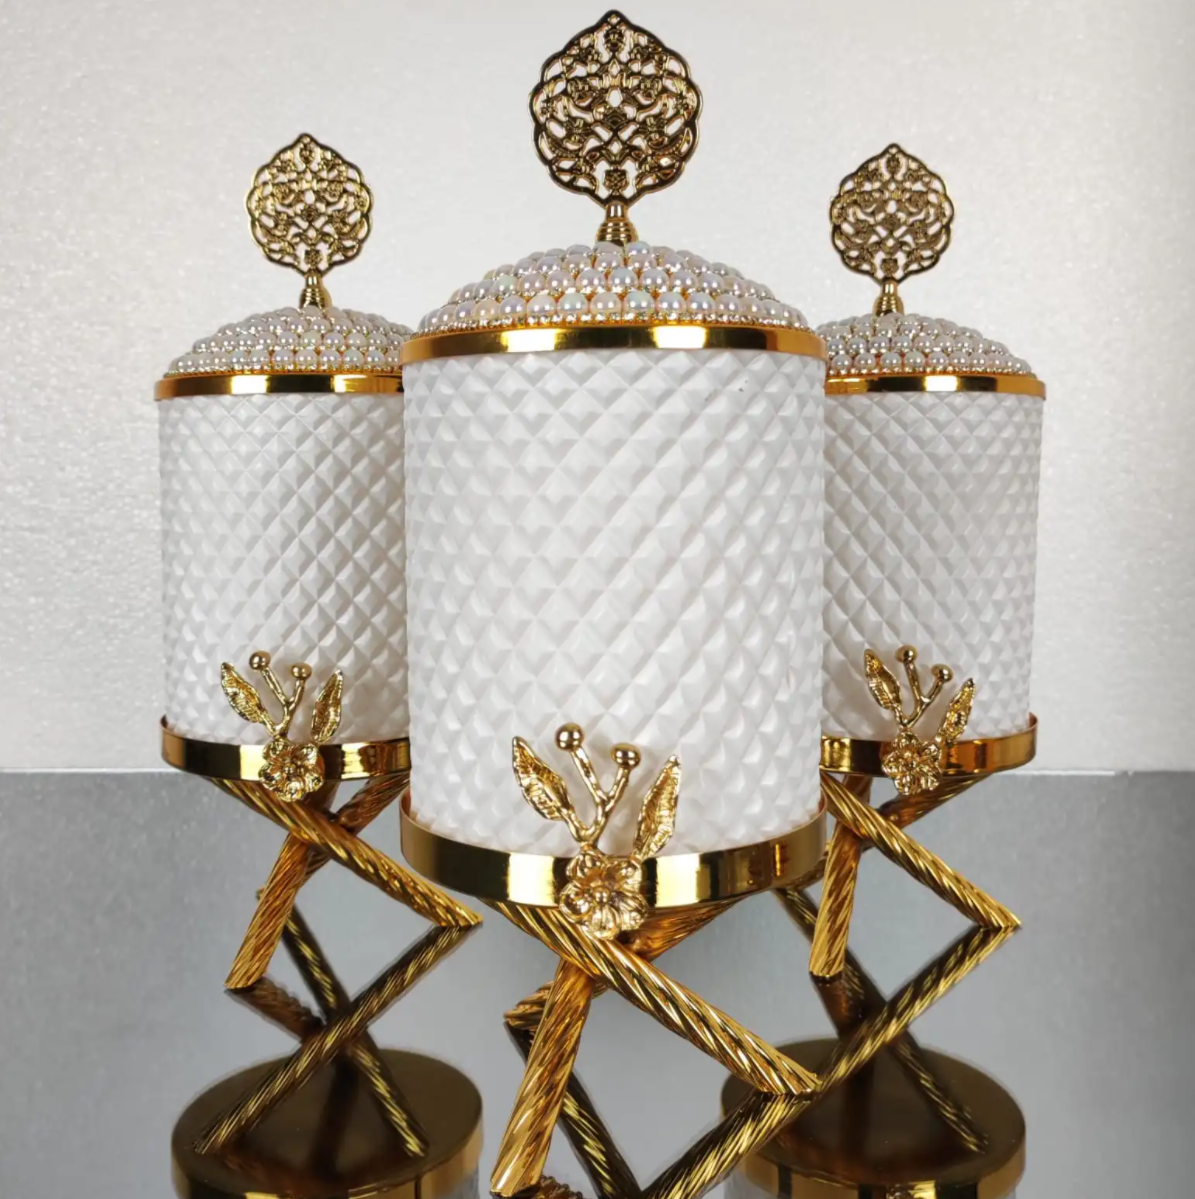 Gold and White Pearl Hammered Canister Set With Stand (3 Pieces)